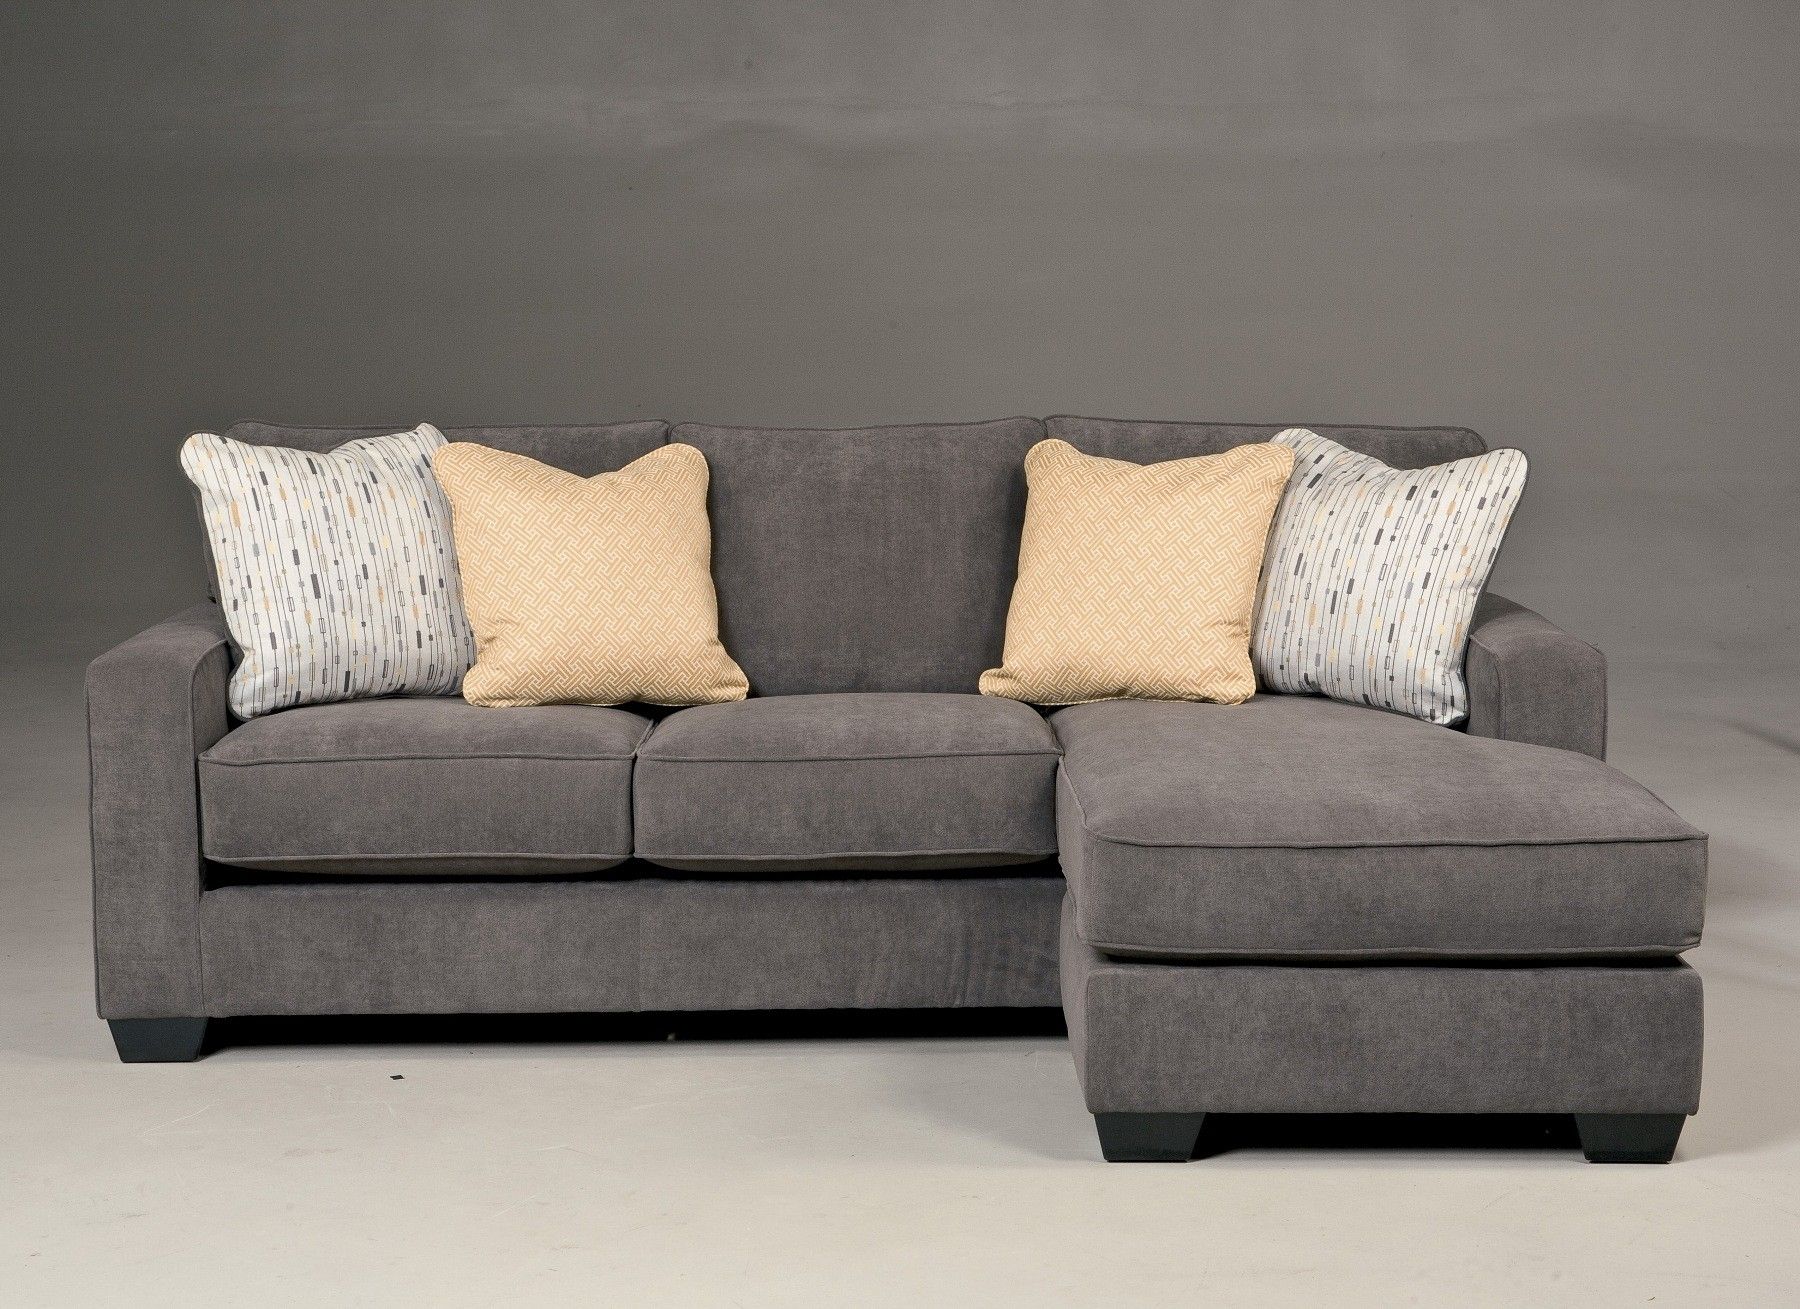 Hodan Sofa Chaise – Marble | Simply Beautiful, Earthy And Plush Regarding Gainesville Fl Sectional Sofas (View 10 of 10)